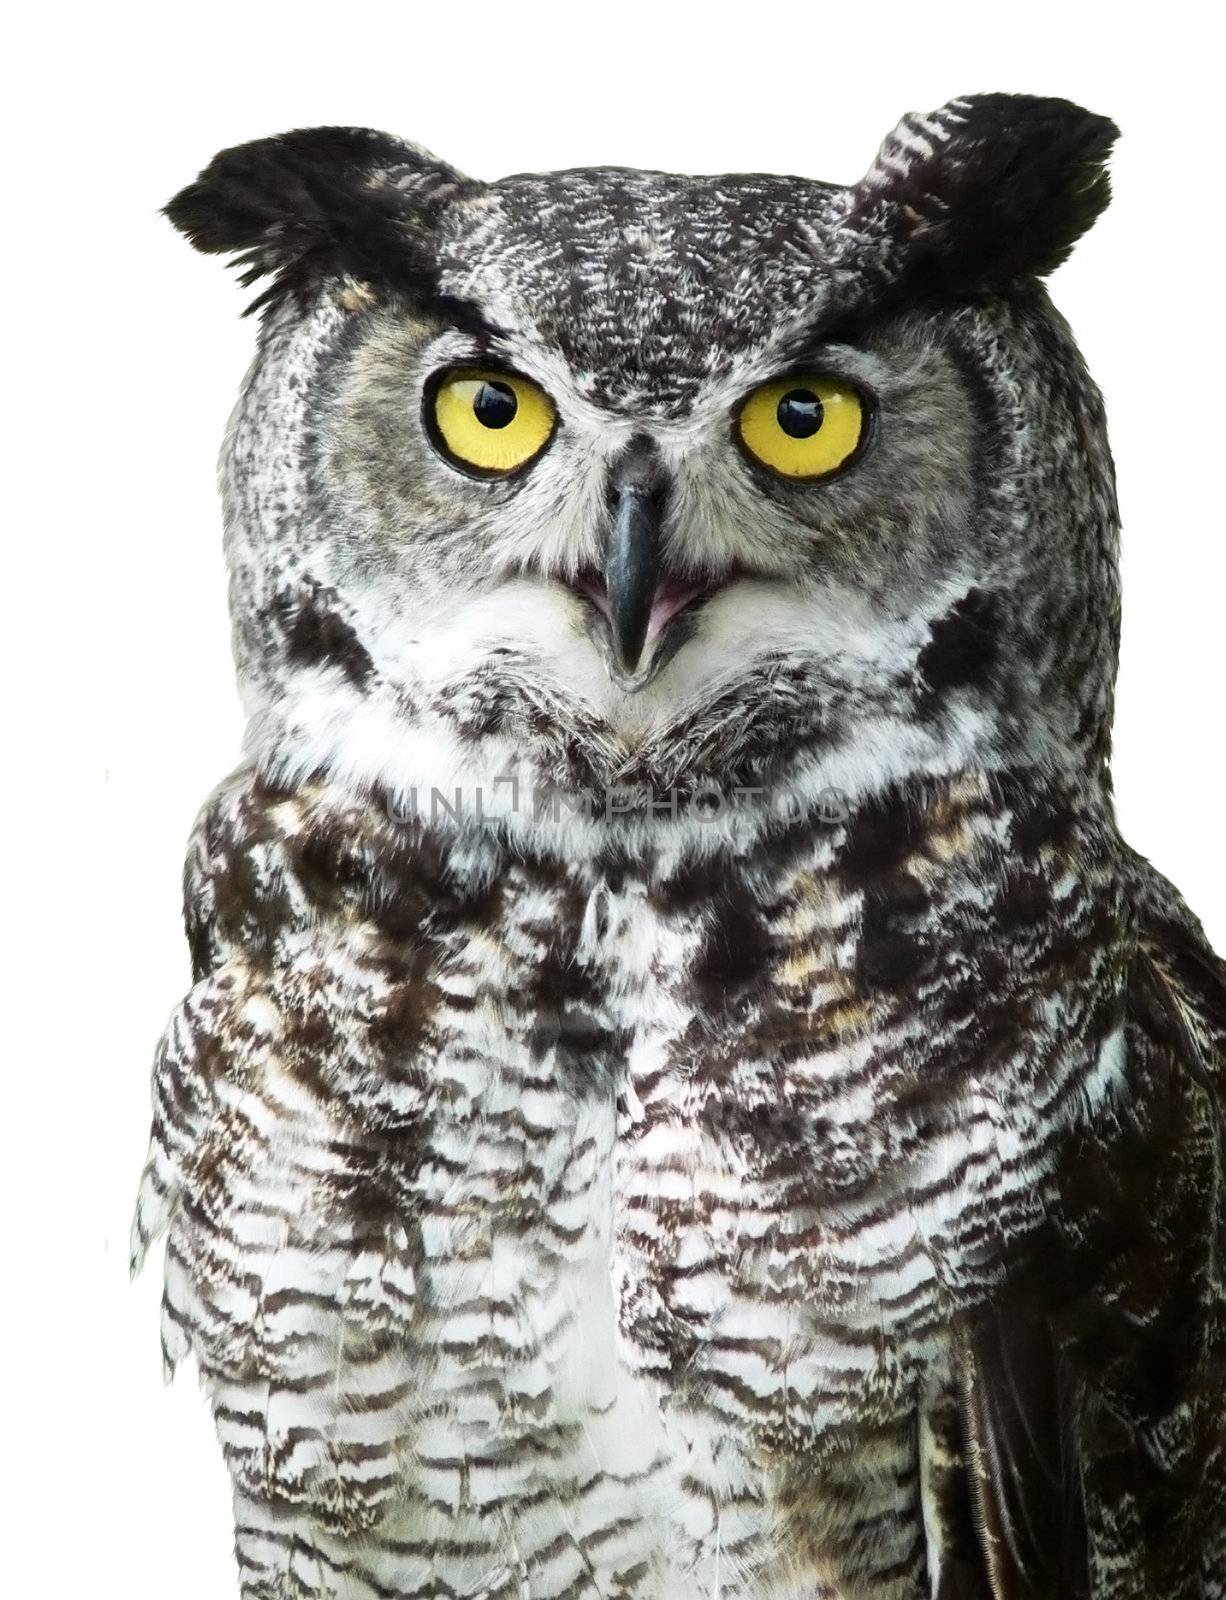 Close-up of a Great horned Owl with very bright yellow eyes looking directly at the camera with eyes and feathers details.